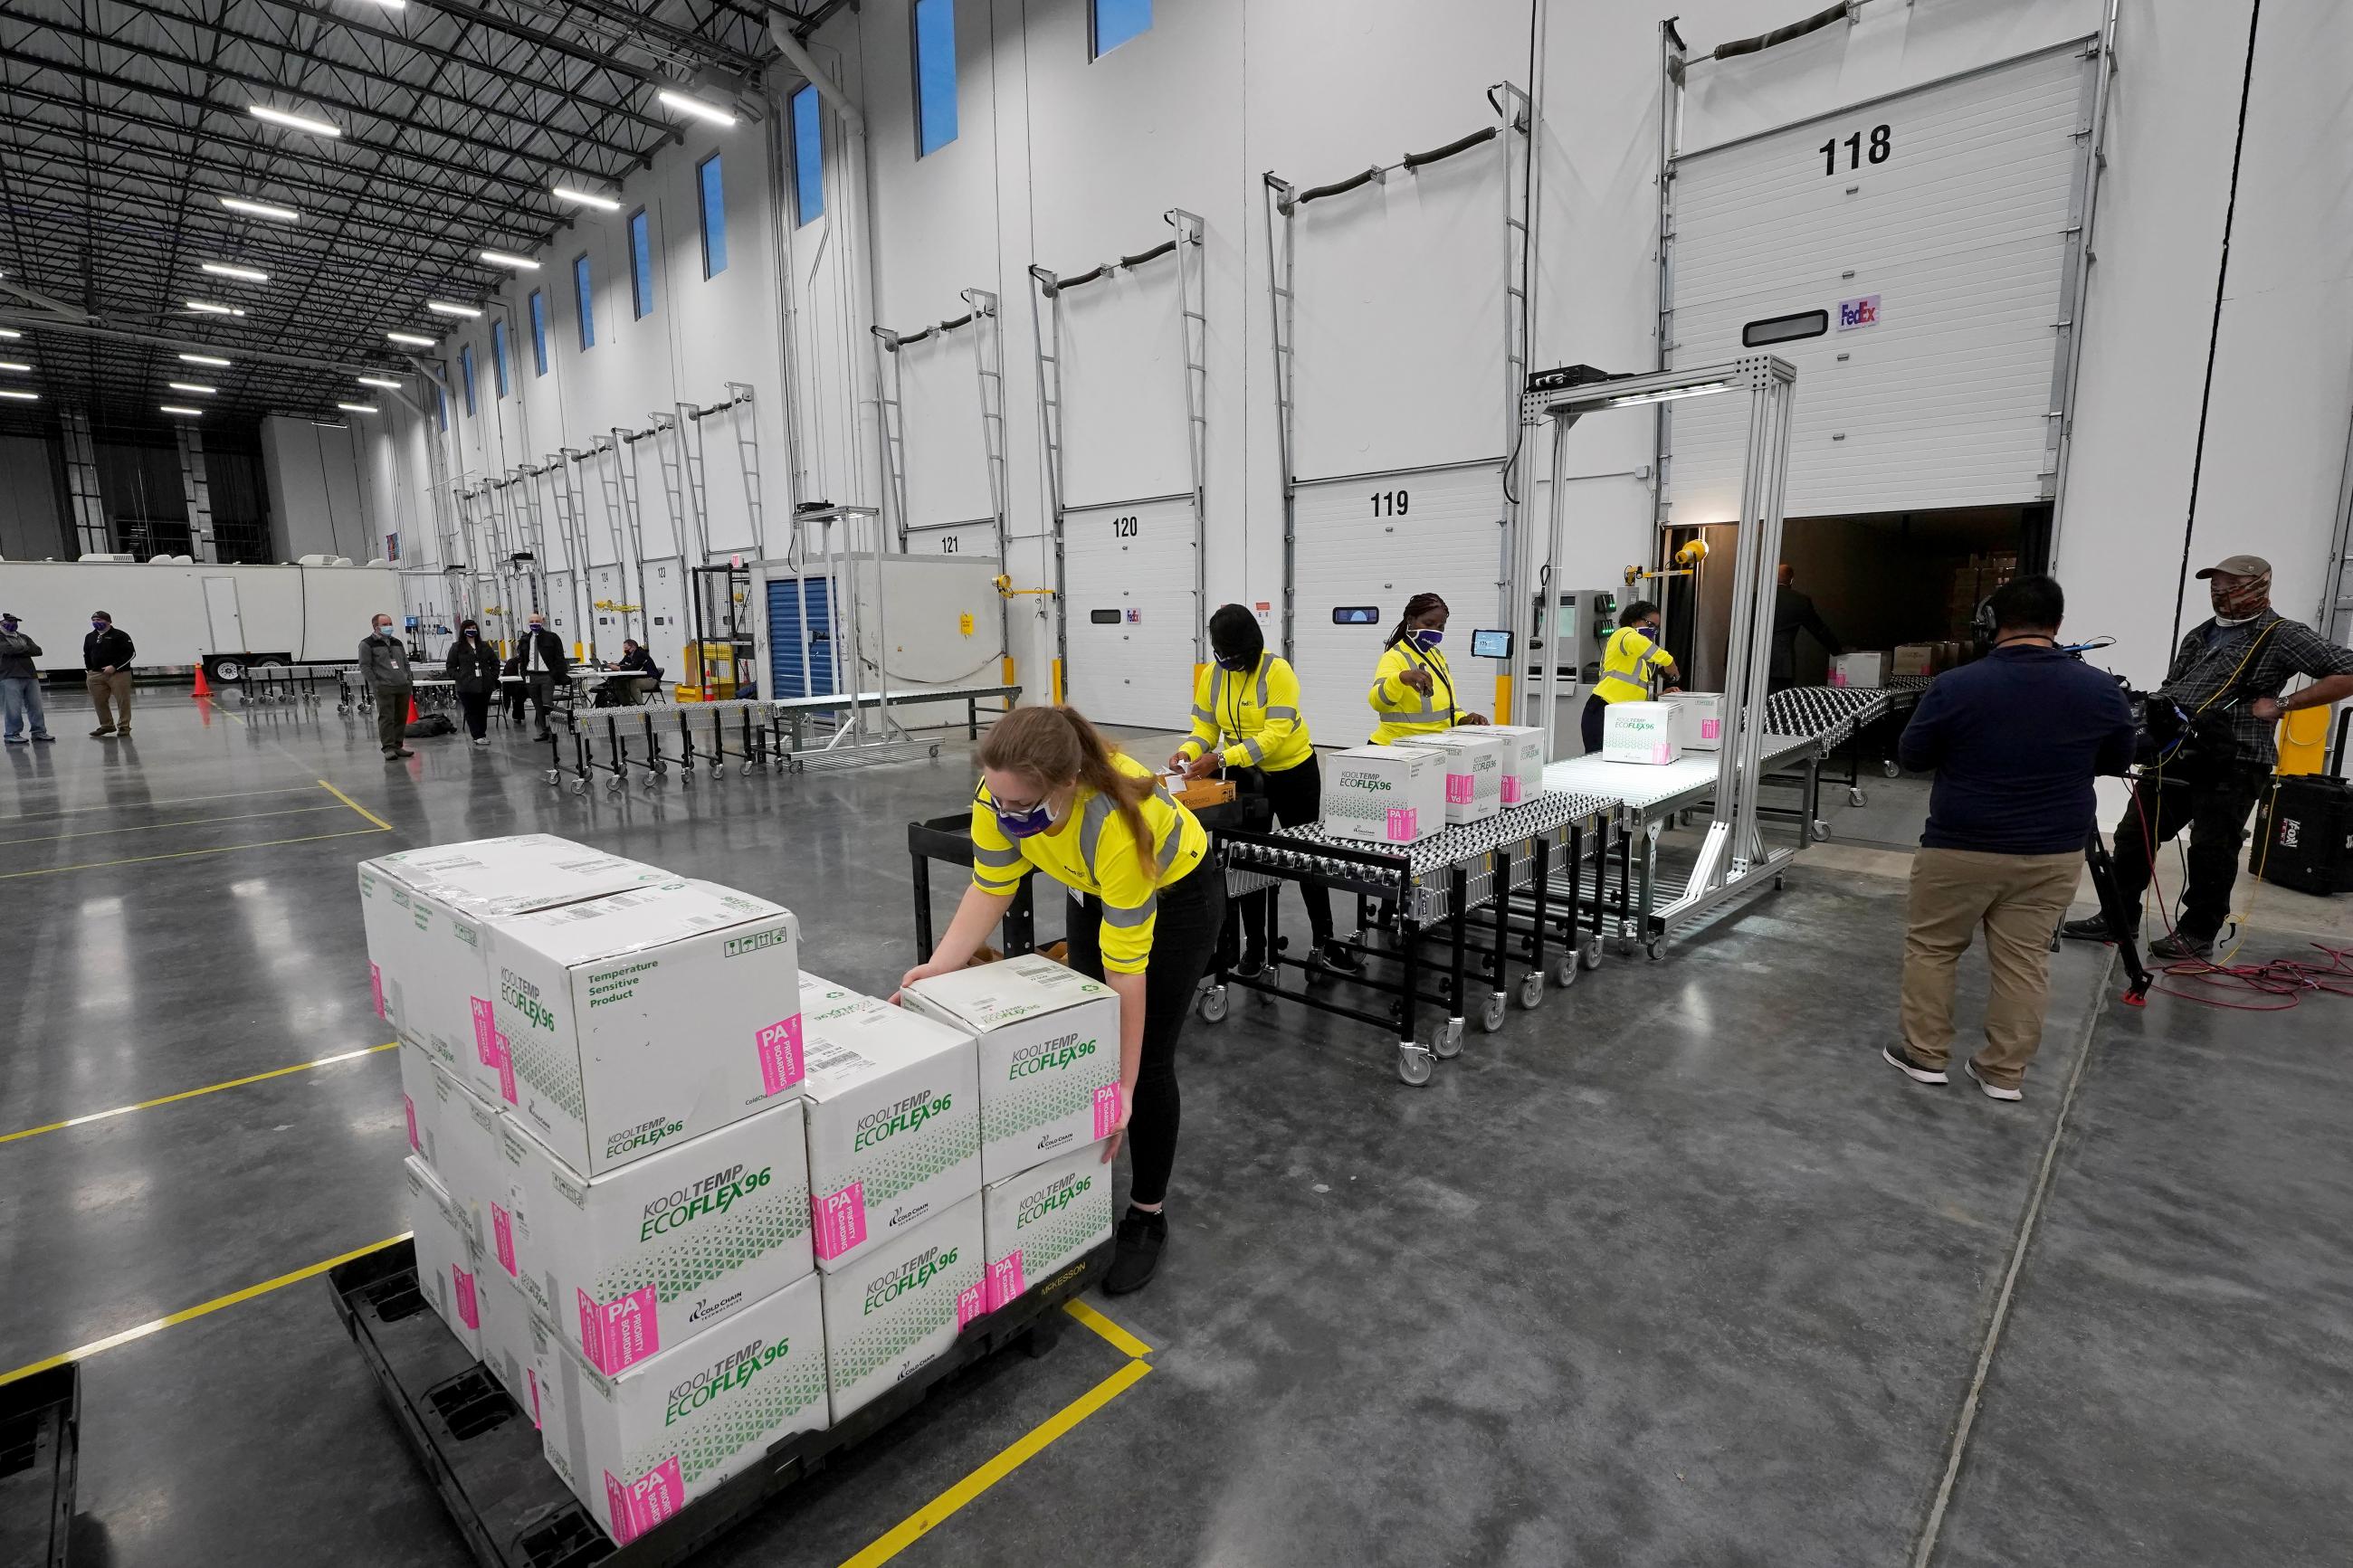 Boxes containing the Moderna COVID-19 vaccine are prepared for shipment at the McKesson distribution center in Olive Branch, Mississippi on December 20, 2020.